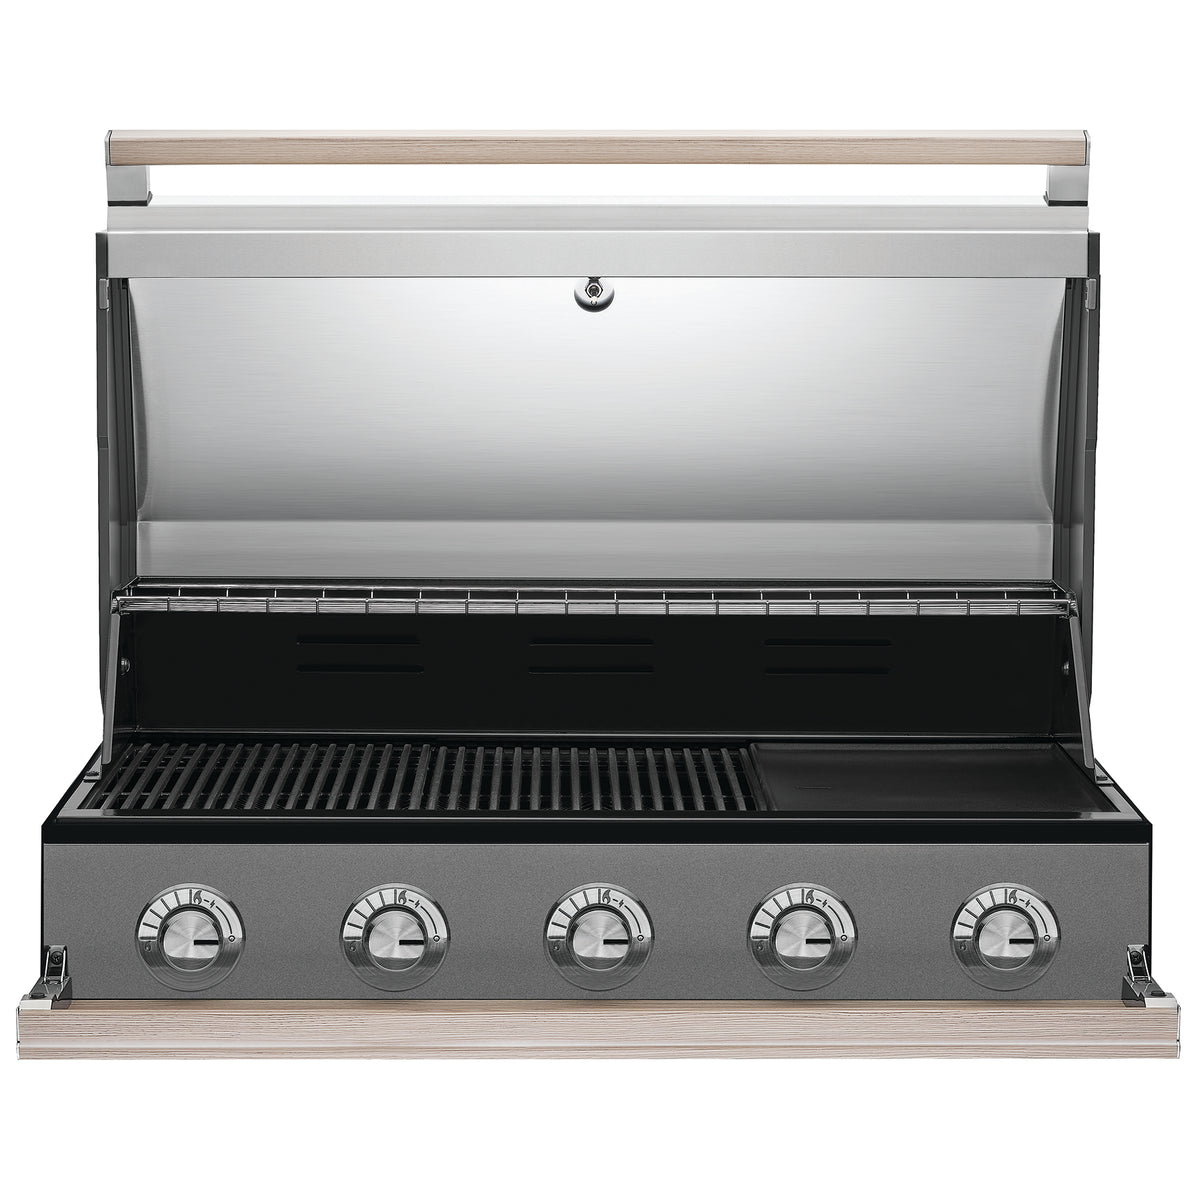 BeefEater 1500 Series 5 Burner Build-in Gas Barbecue